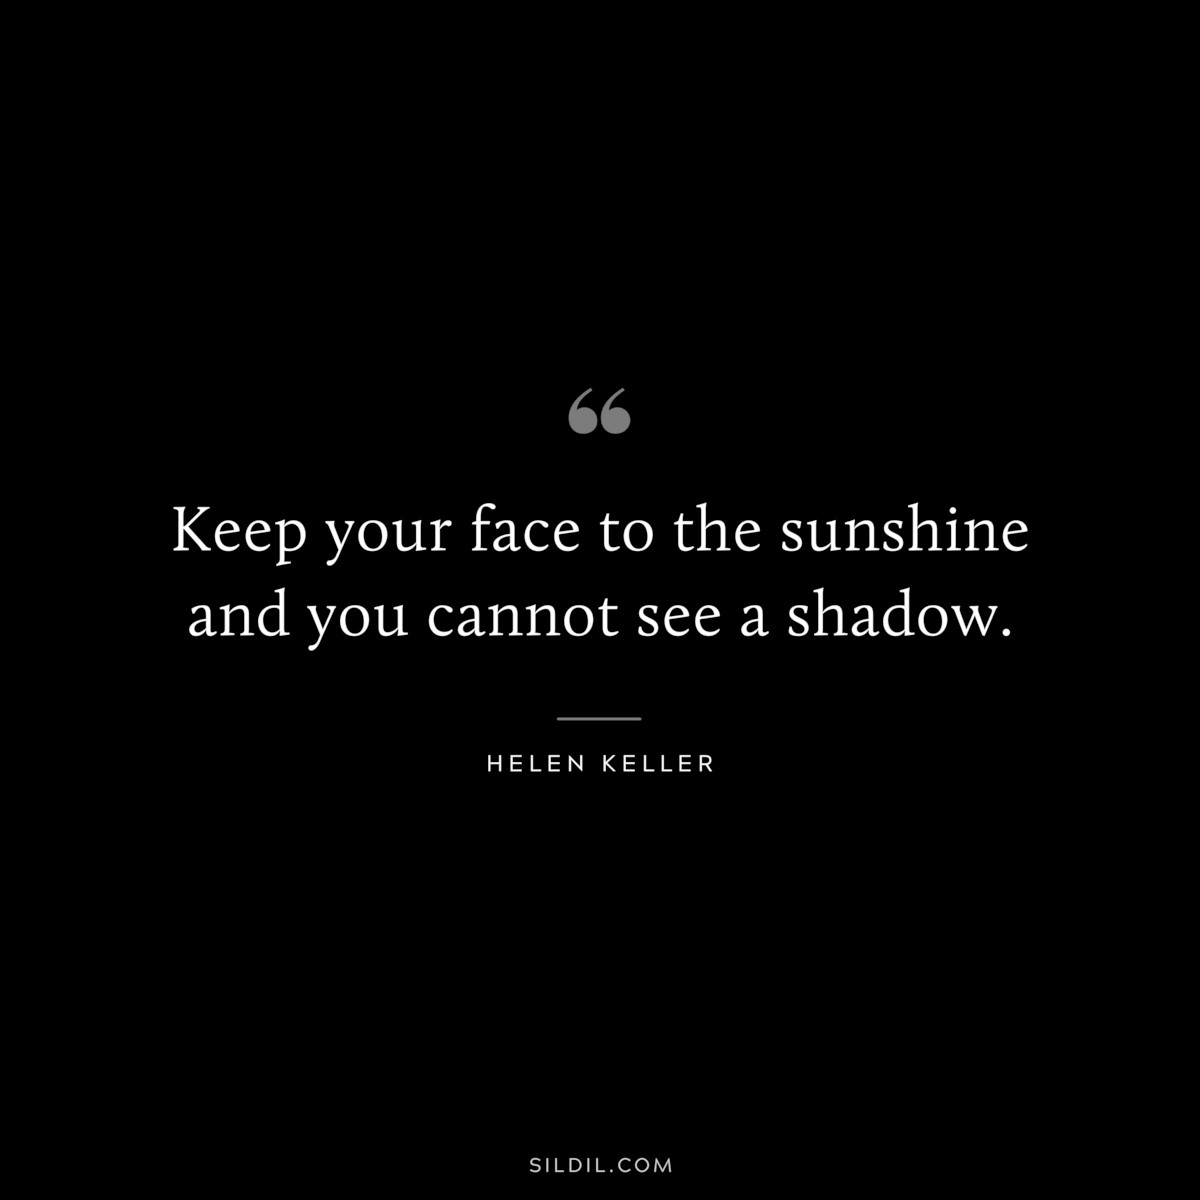 Keep your face to the sunshine and you cannot see a shadow. ― Helen Keller